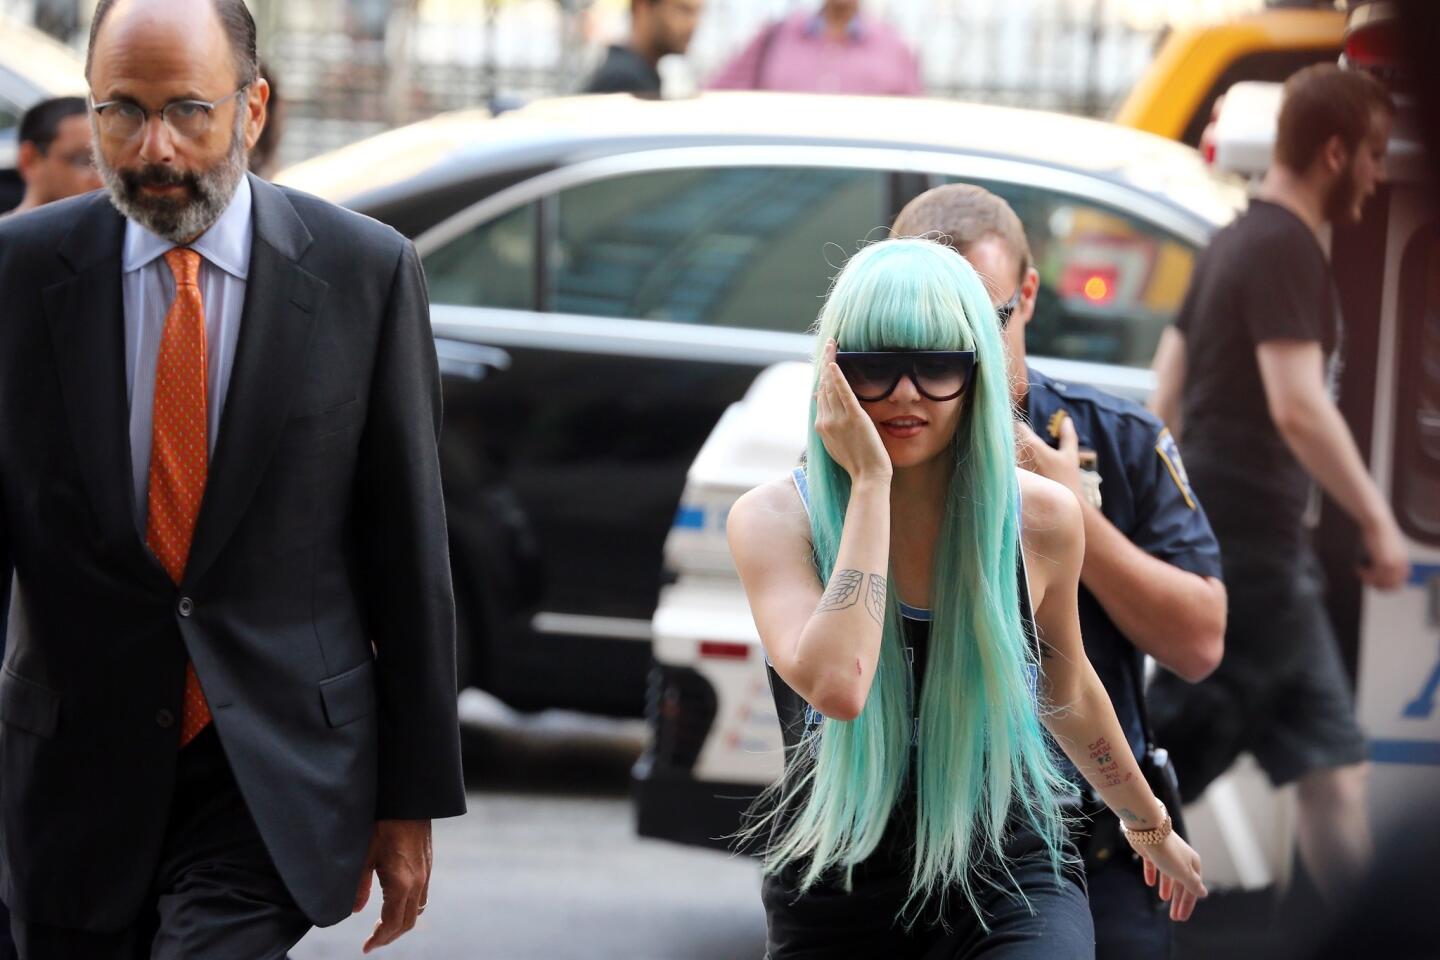 Amanda Bynes subjected to mental health evaluation; parents finally step in